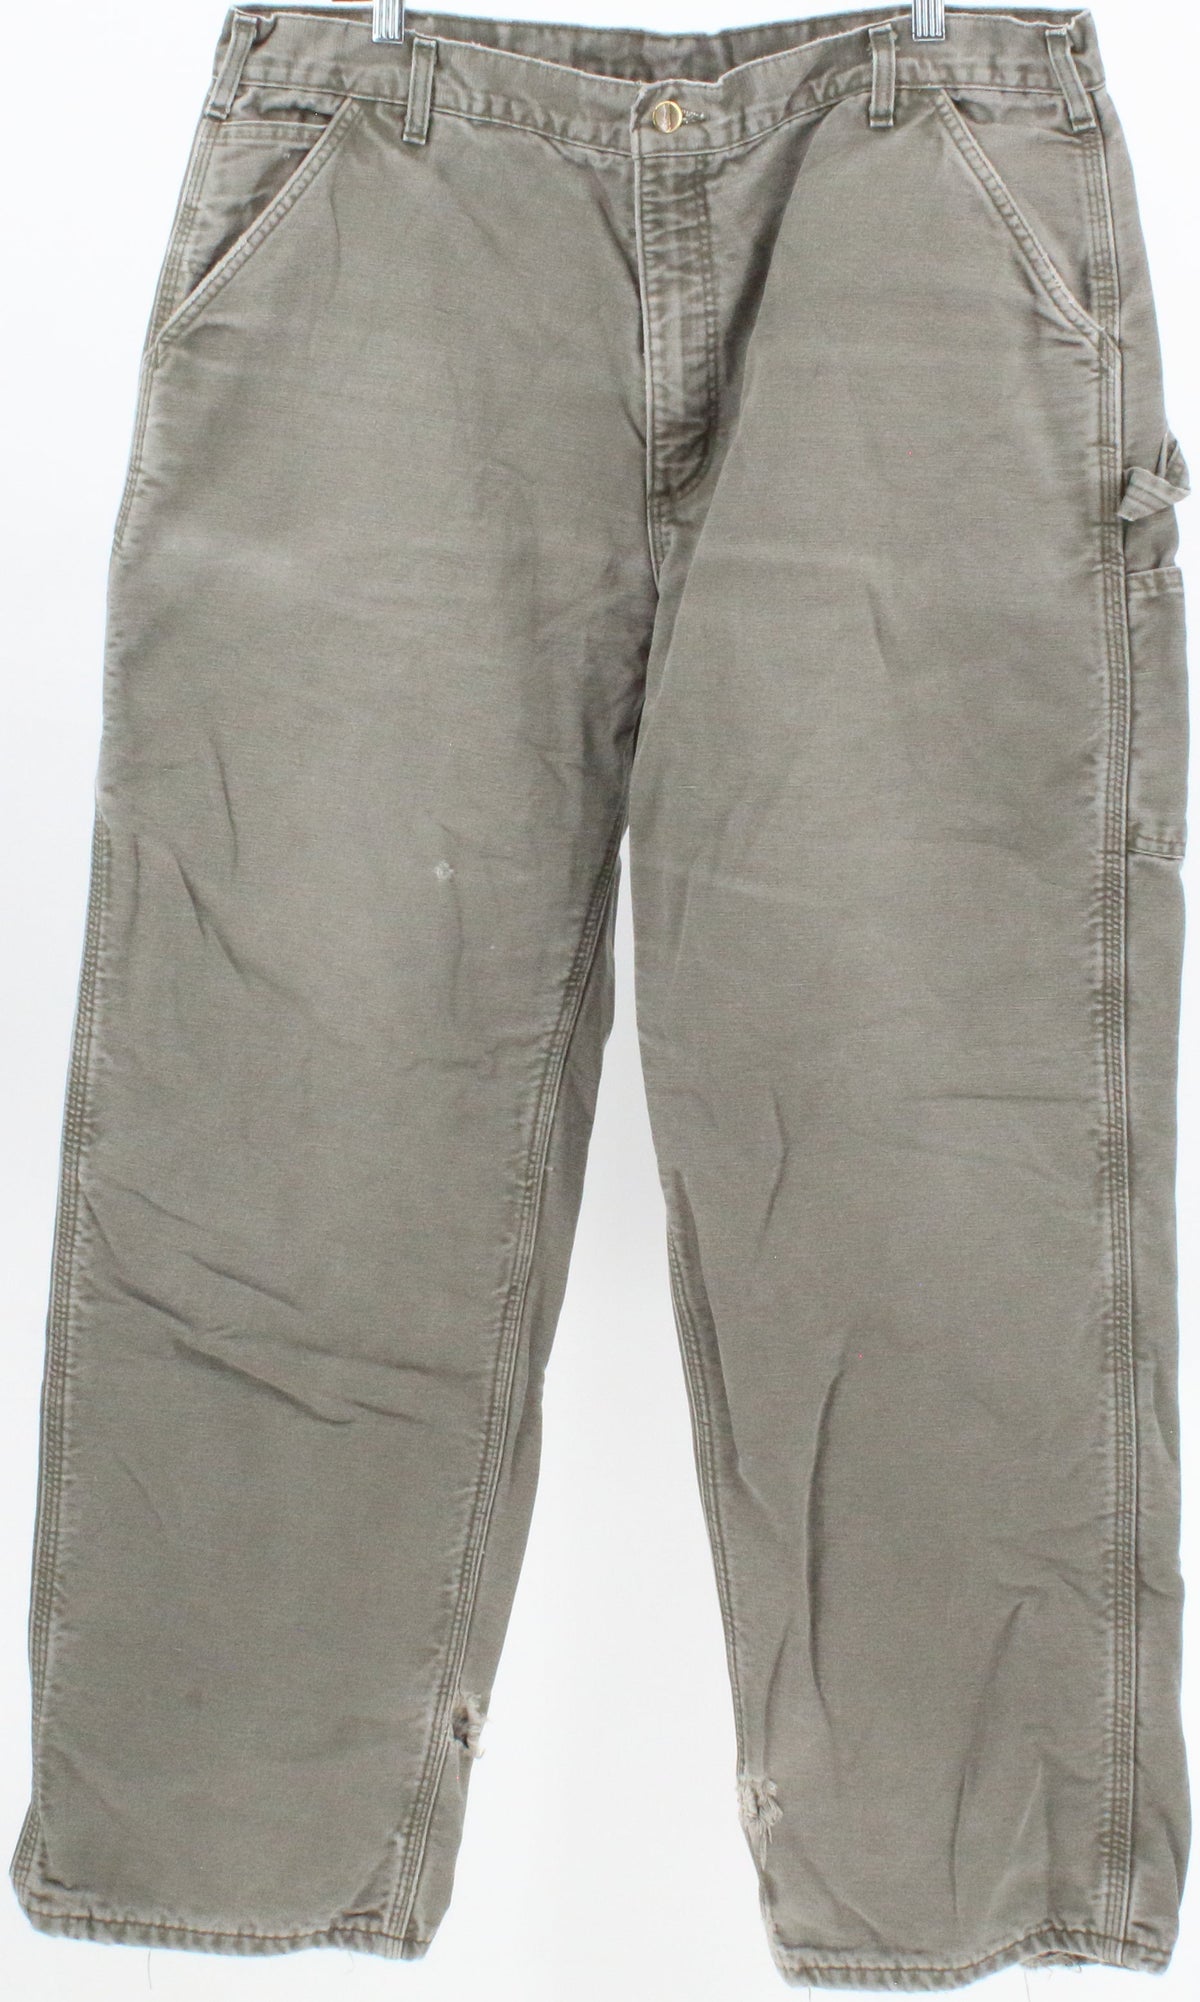 Carhartt Green Cargo Pants With Plaid Lining